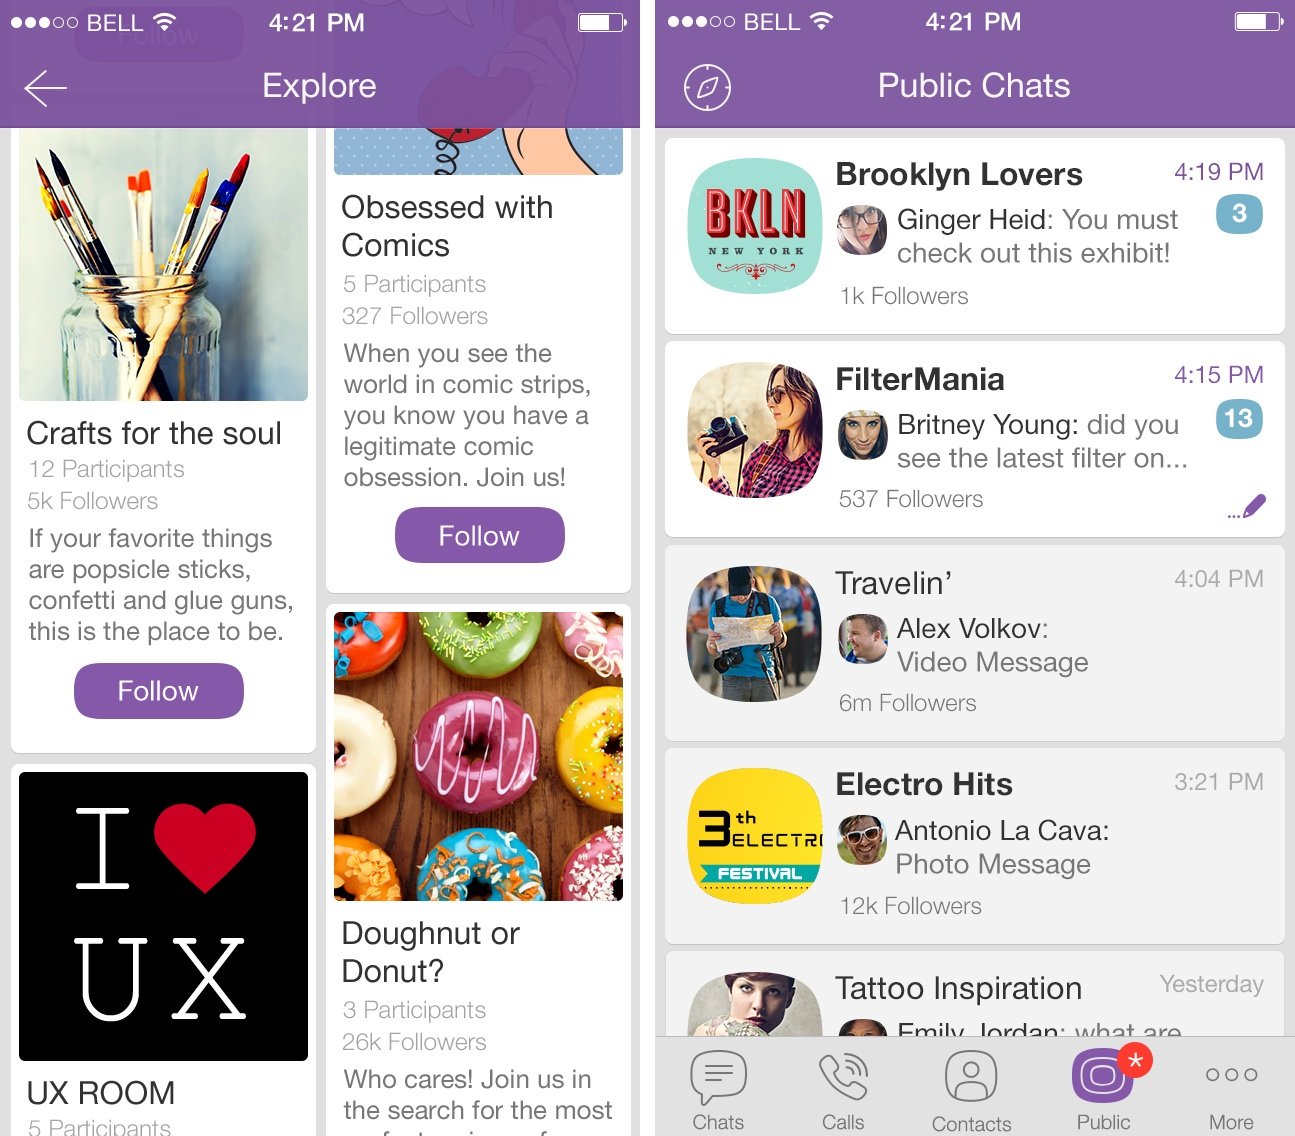 free download viber for iphone 5